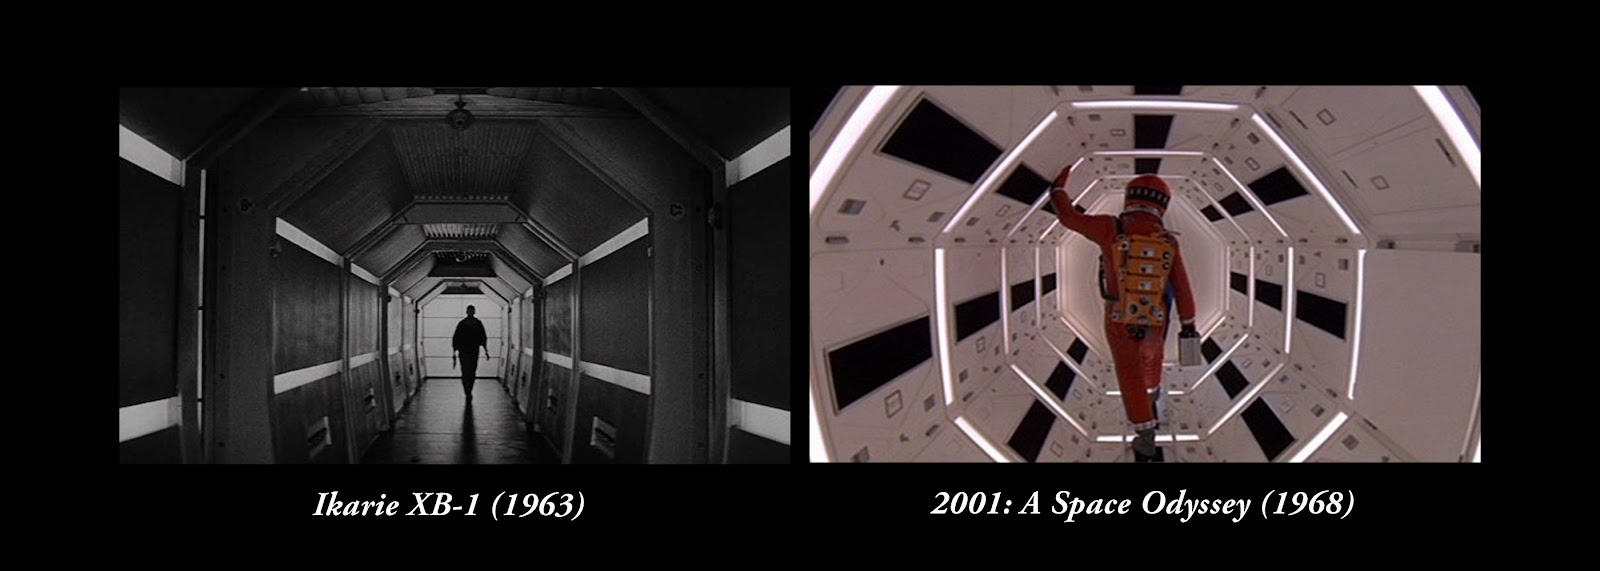 A side by side comparison between iconic tunnel shots in Ikarie XB-1 and 2001: A Space Odyssey.